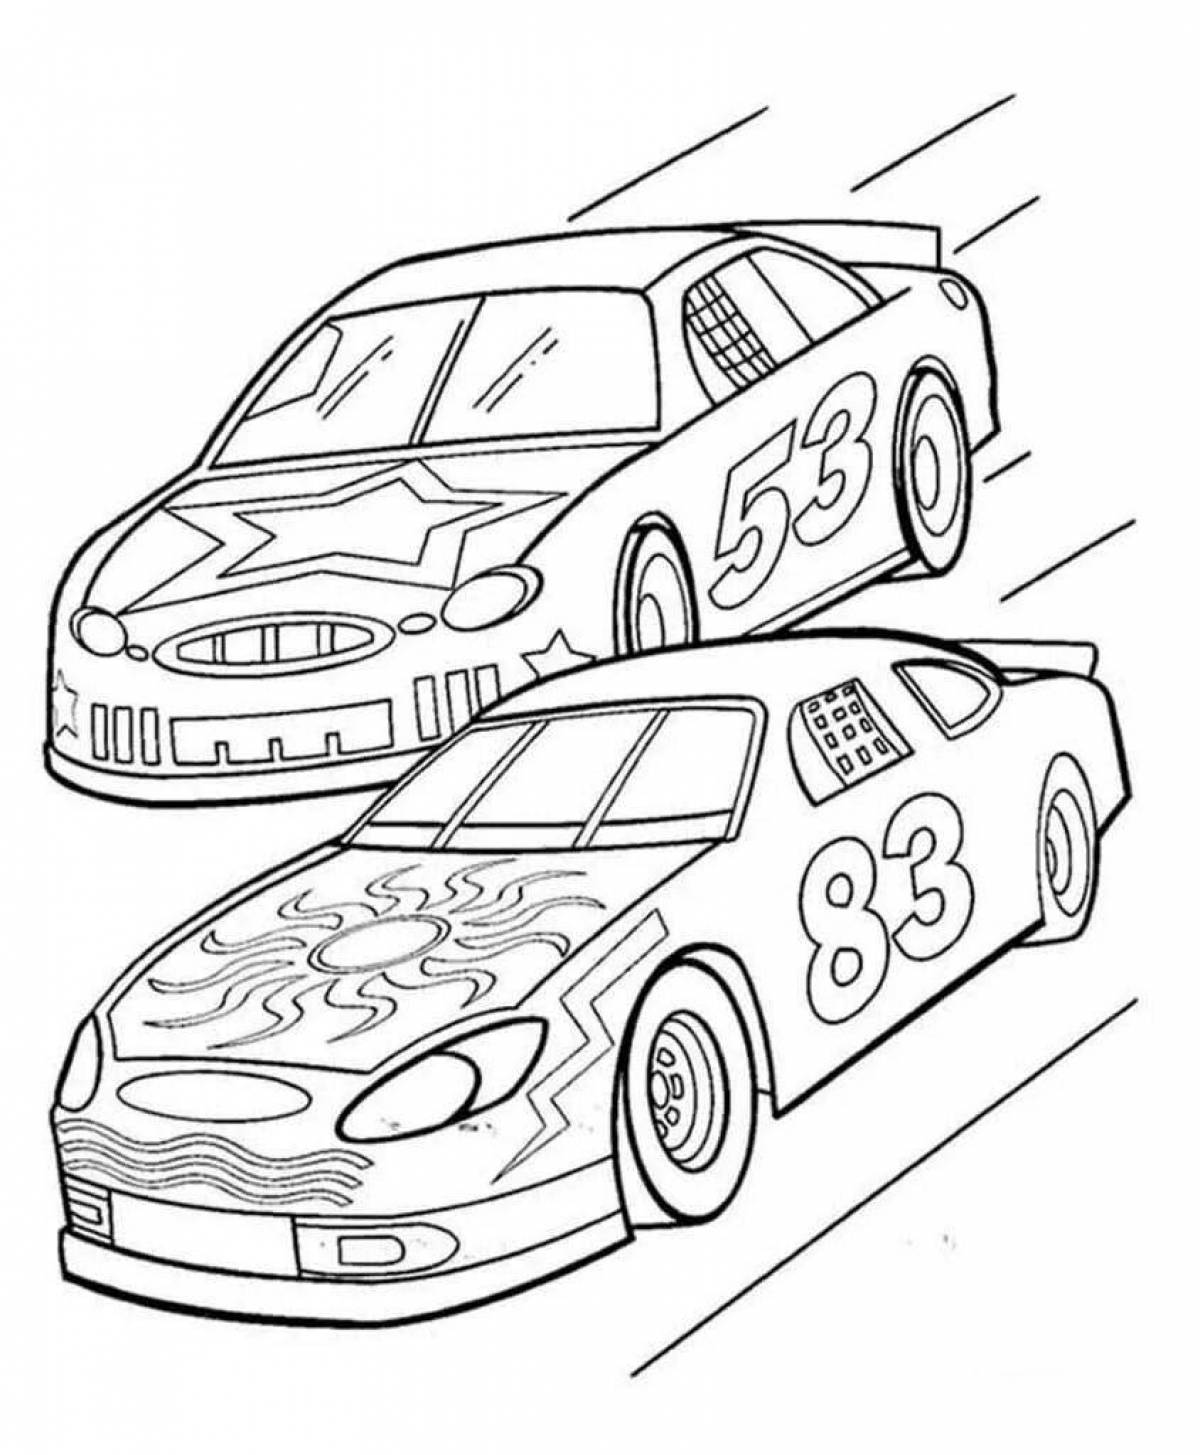 Colorful racing car coloring for kids